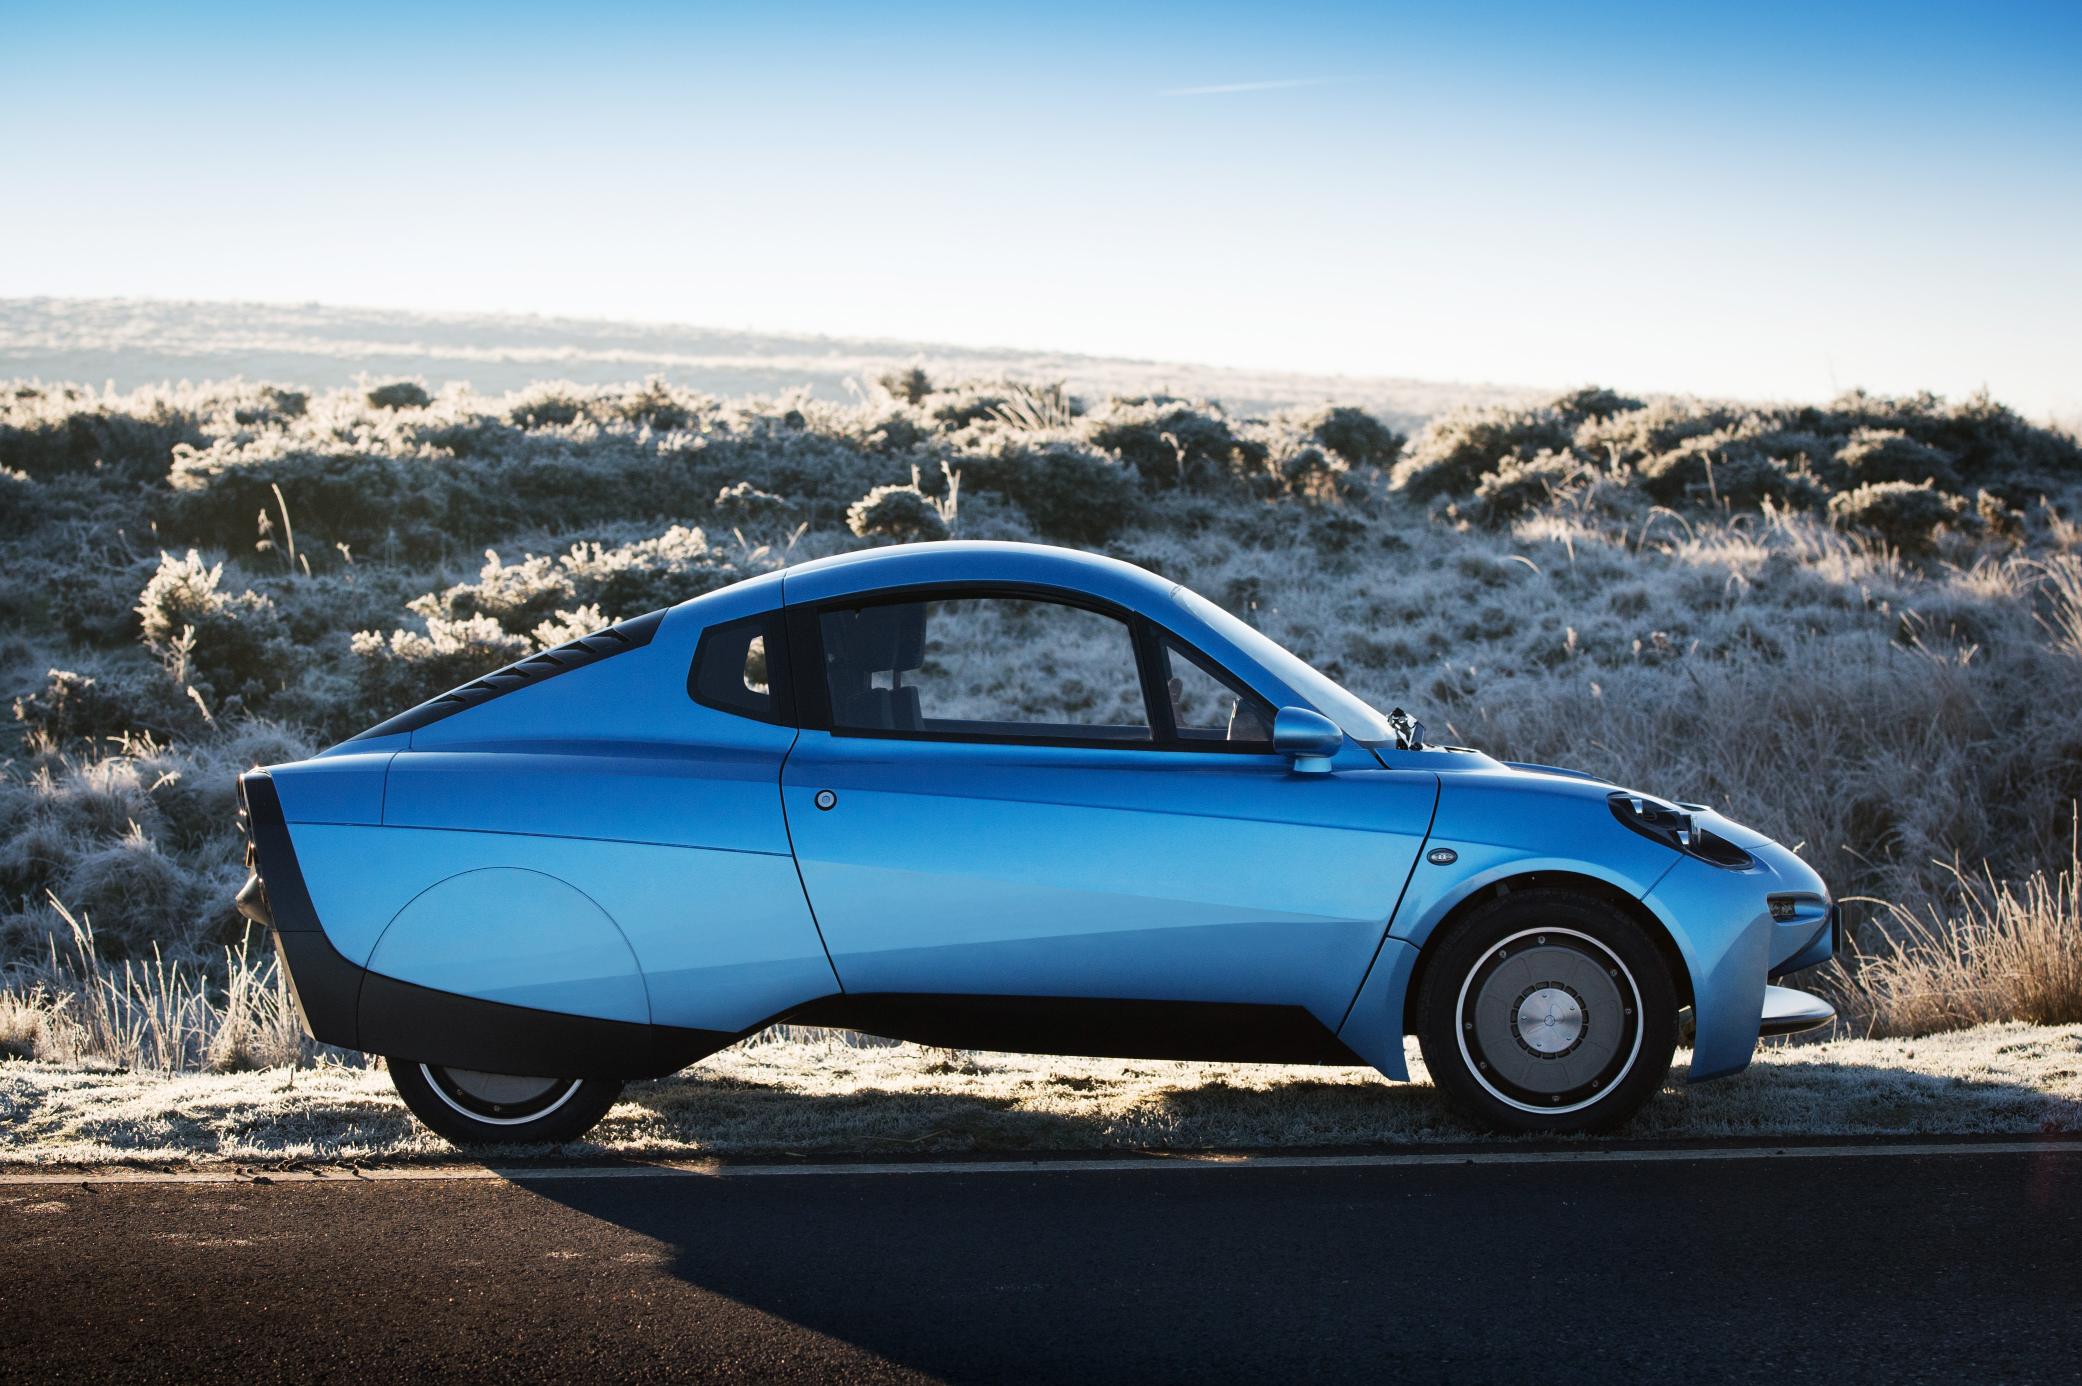 instead_of_carbon_dioxide_this_hydrogen_powered_car_emits_water